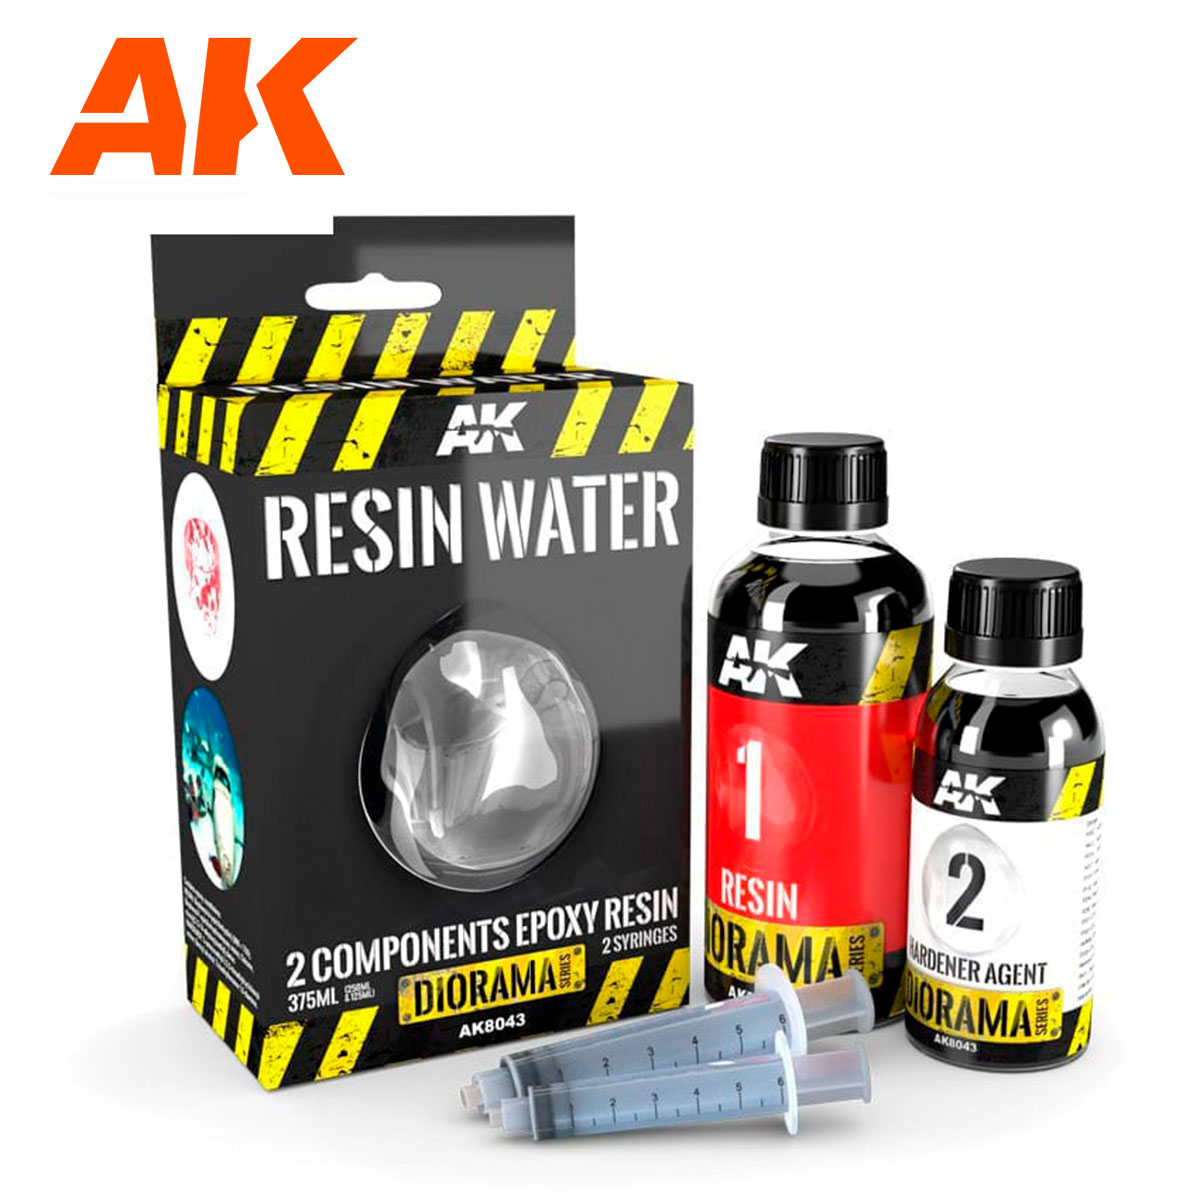 RESIN WATER 2-COMPONENTS EPOXY RESIN – 375ML (EMAILLIE)